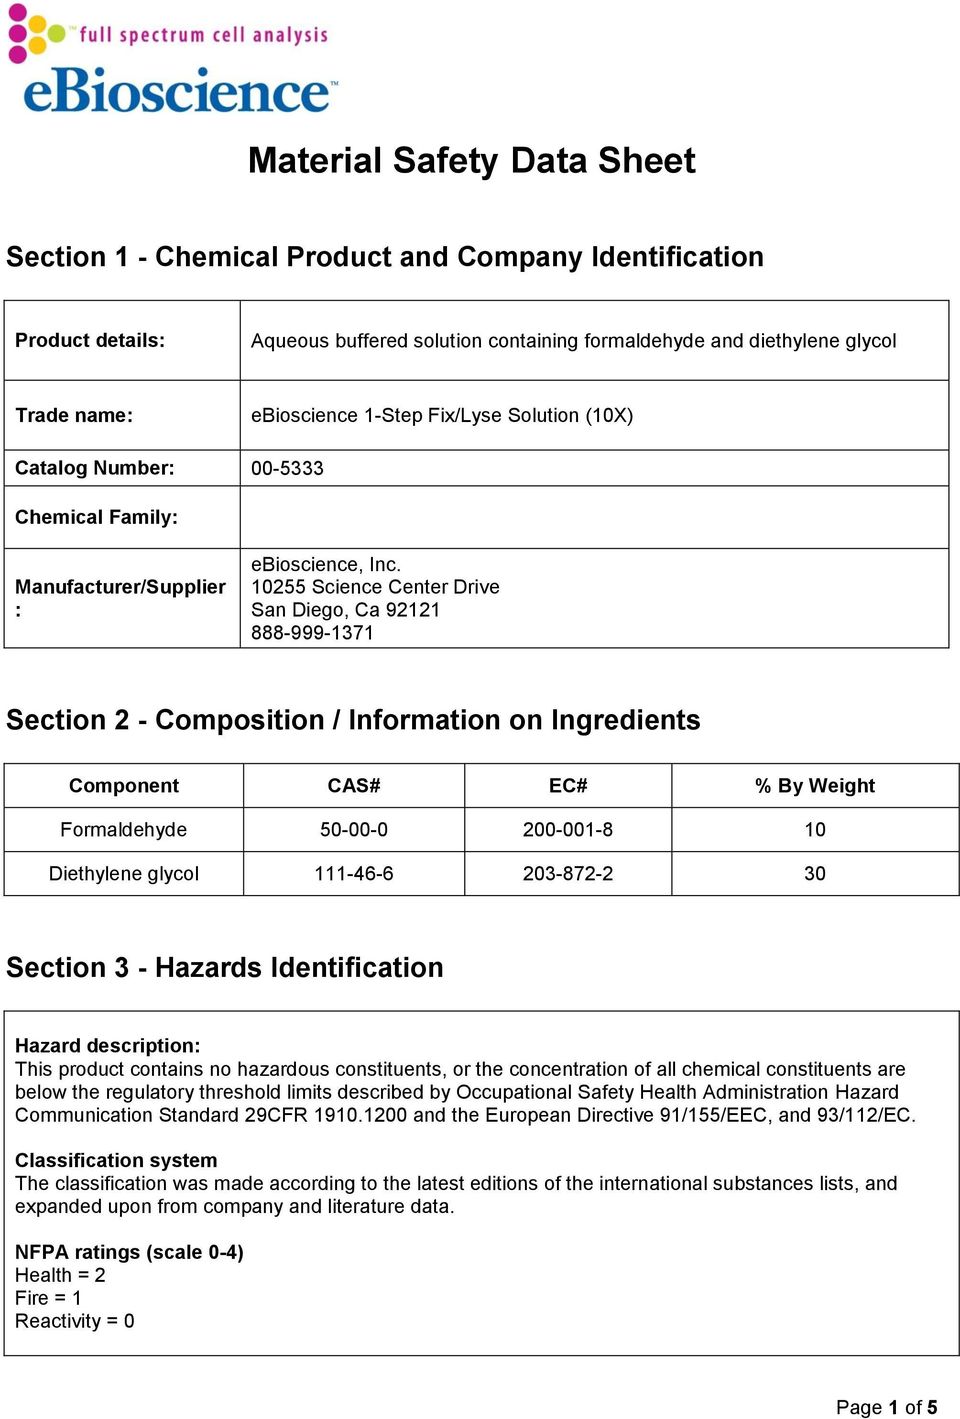 10255 Science Center Drive San Diego, Ca 92121 888-999-1371 Section 2 - Composition / Information on Ingredients Component CAS# EC# % By Weight Formaldehyde 50-00-0 200-001-8 10 Diethylene glycol